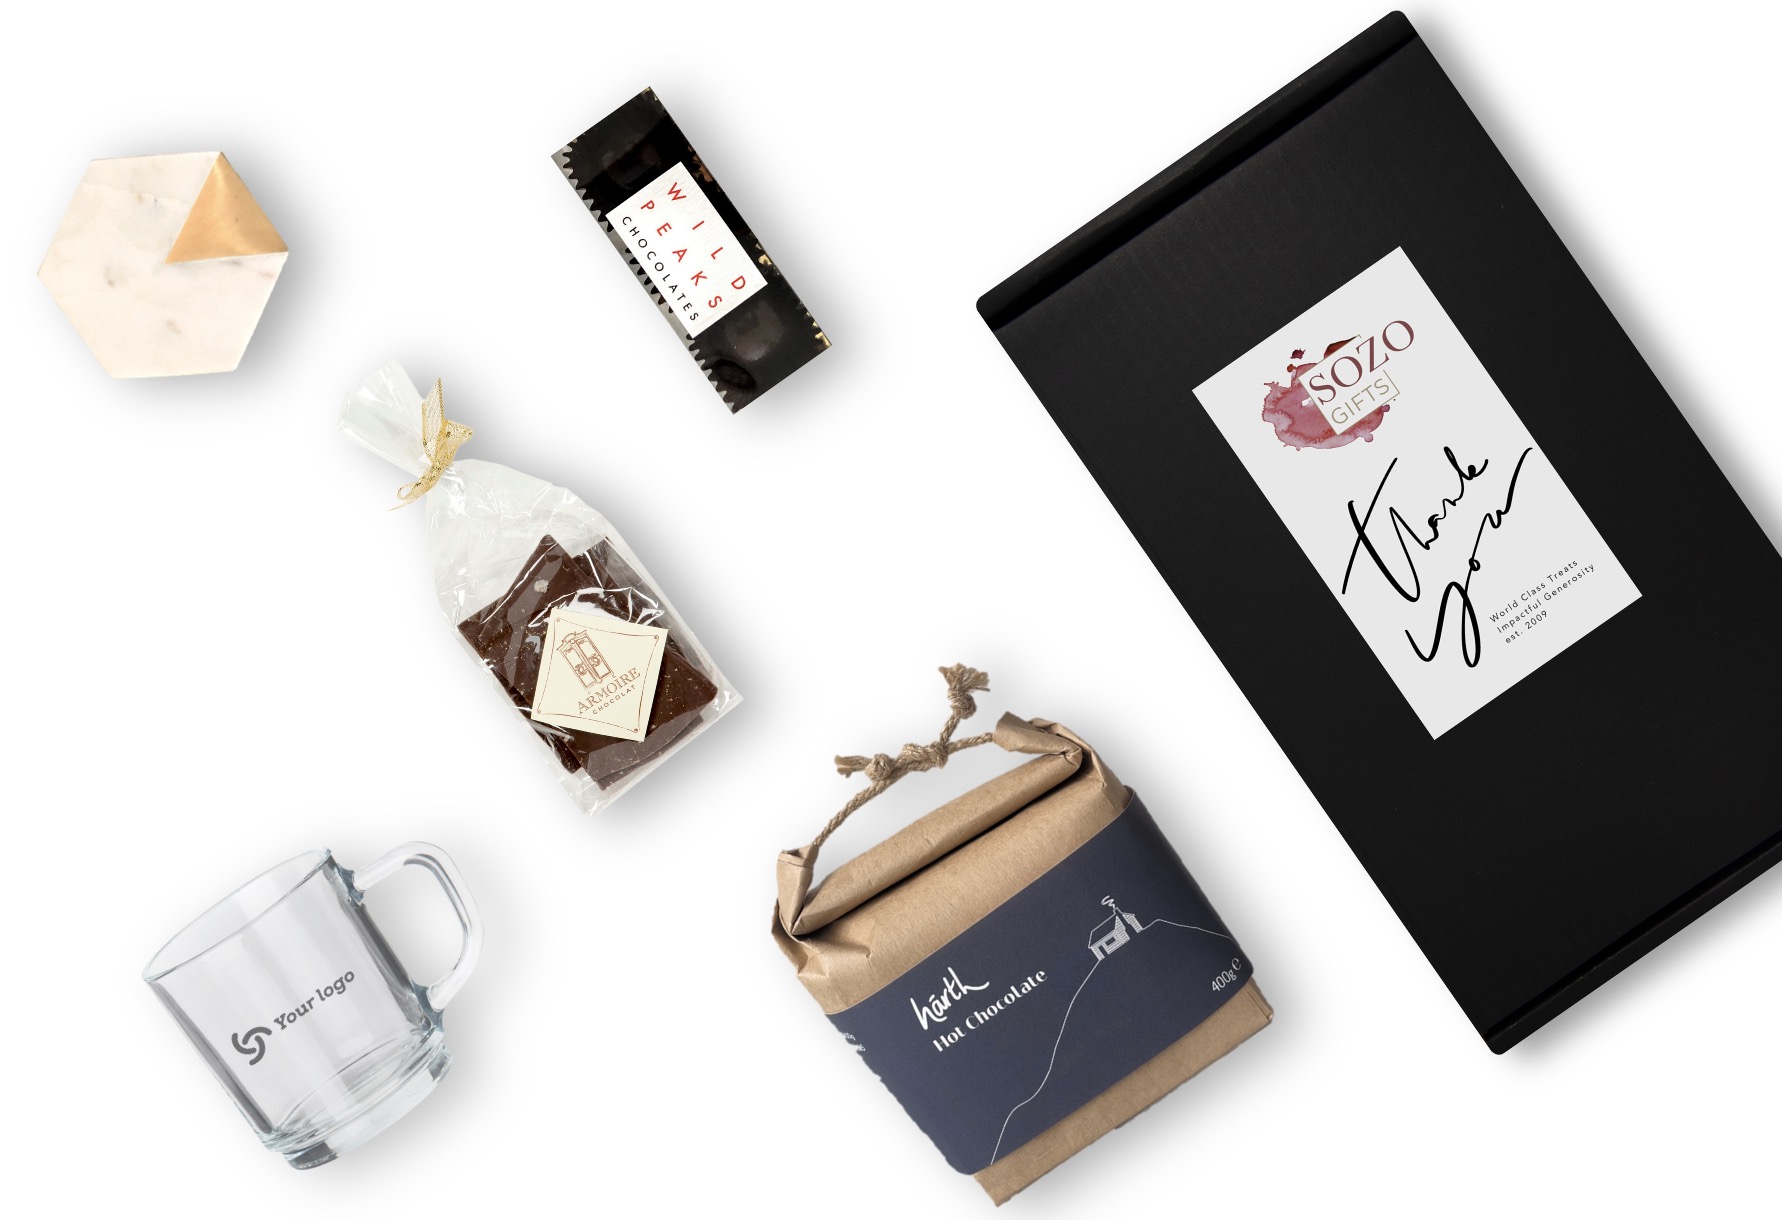 A unique and value-packed gift box with one mug engraved with your logo, one hexagonal marble coaster, one bag of salted dark chocolate by Wild Peaks, a trio of bonbons by Wild Peaks, and a 1 pound bag of artisan hot chocolate mix made by Harth in the UK.